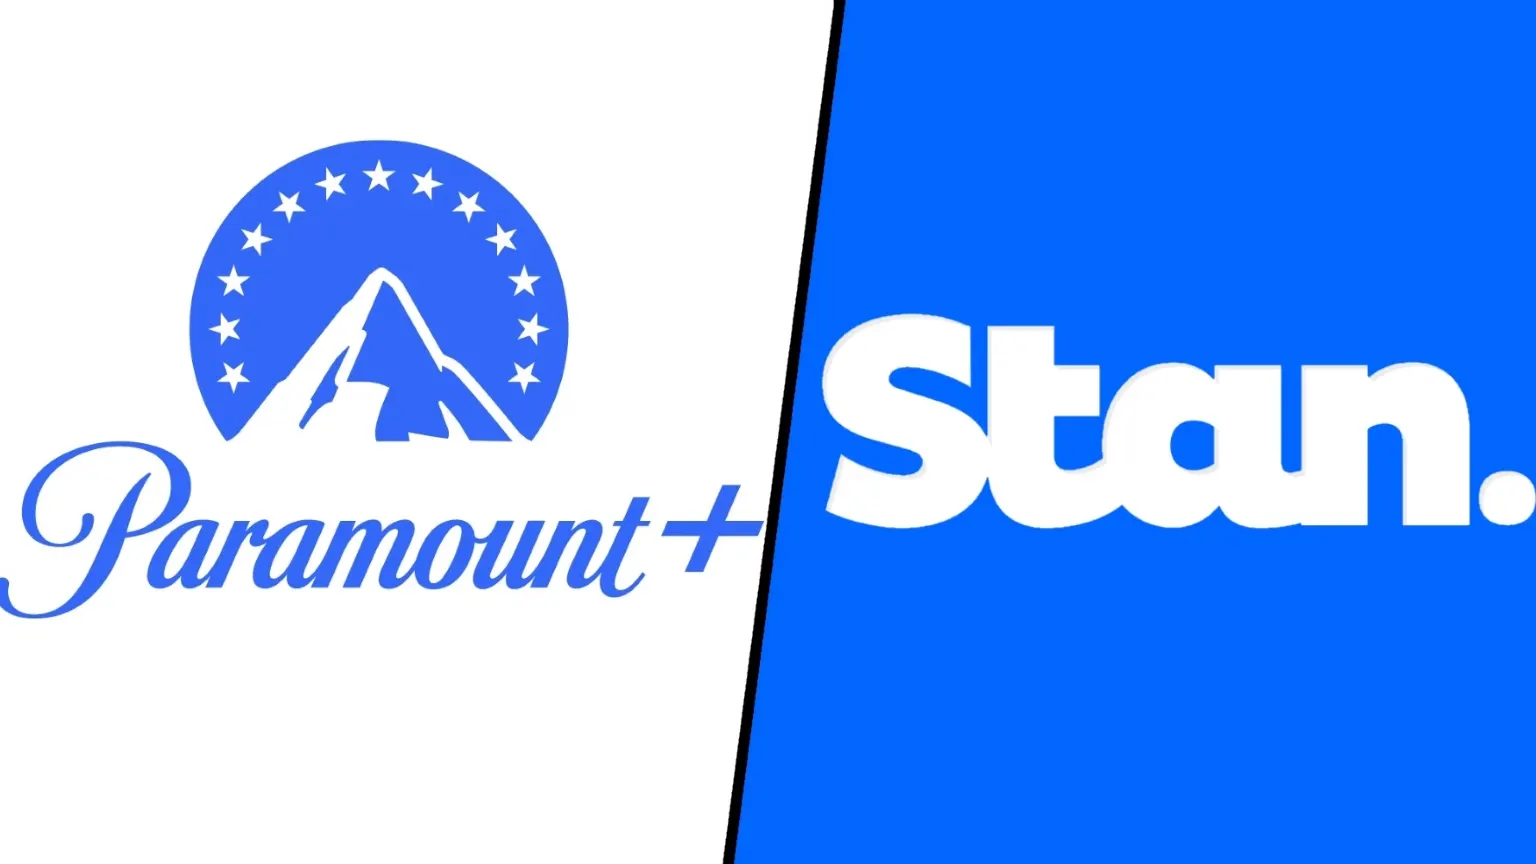 Paramount Plus vs Stan: Price, content and features compared